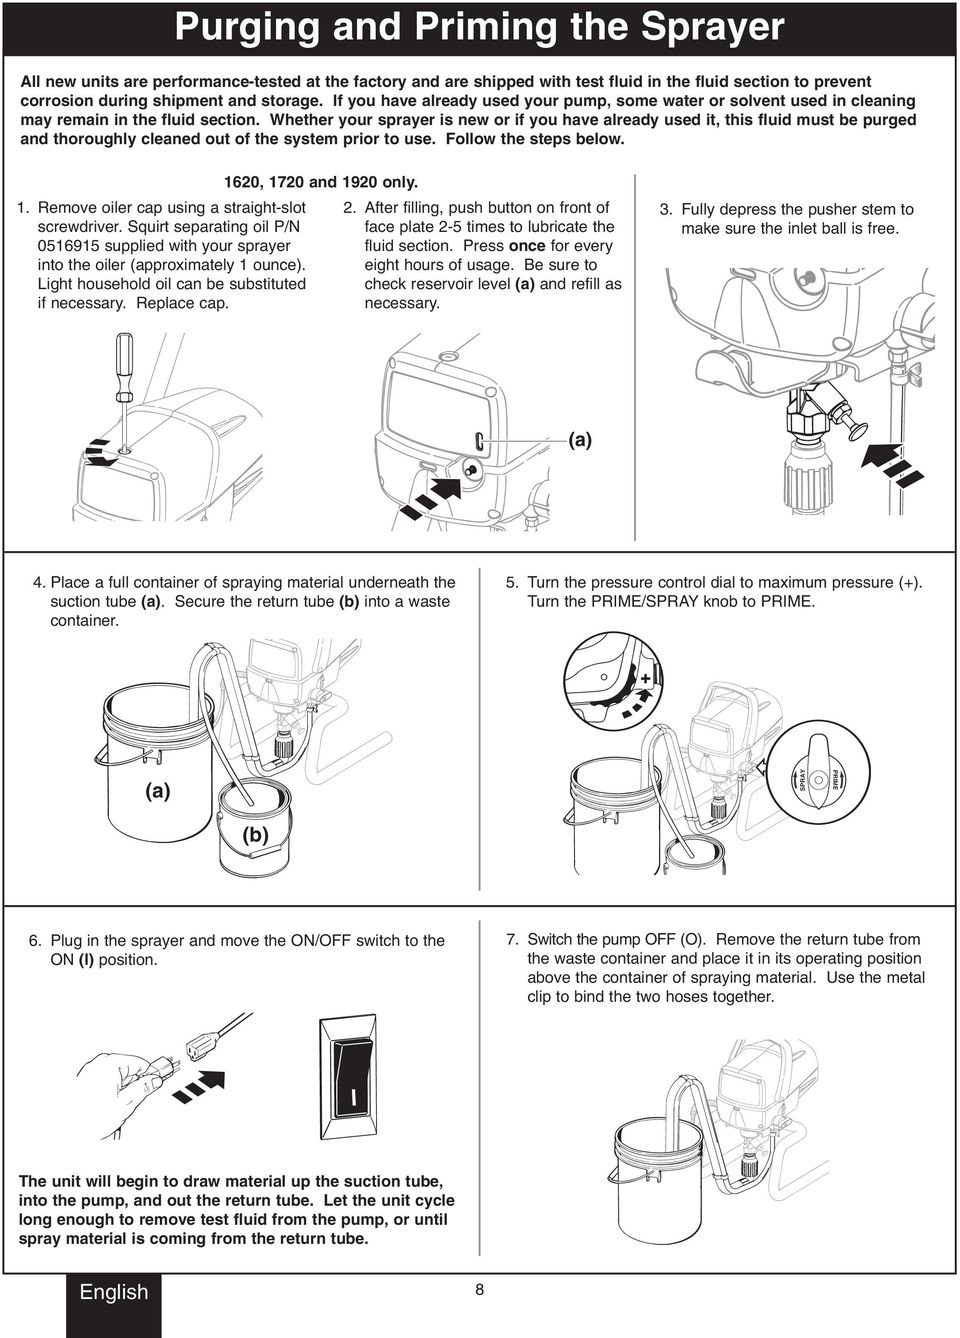 Whether your sprayer is new or if you have already used it, this fluid must be purged and thoroughly cleaned out of the system prior to use. Follow the steps below. 1.